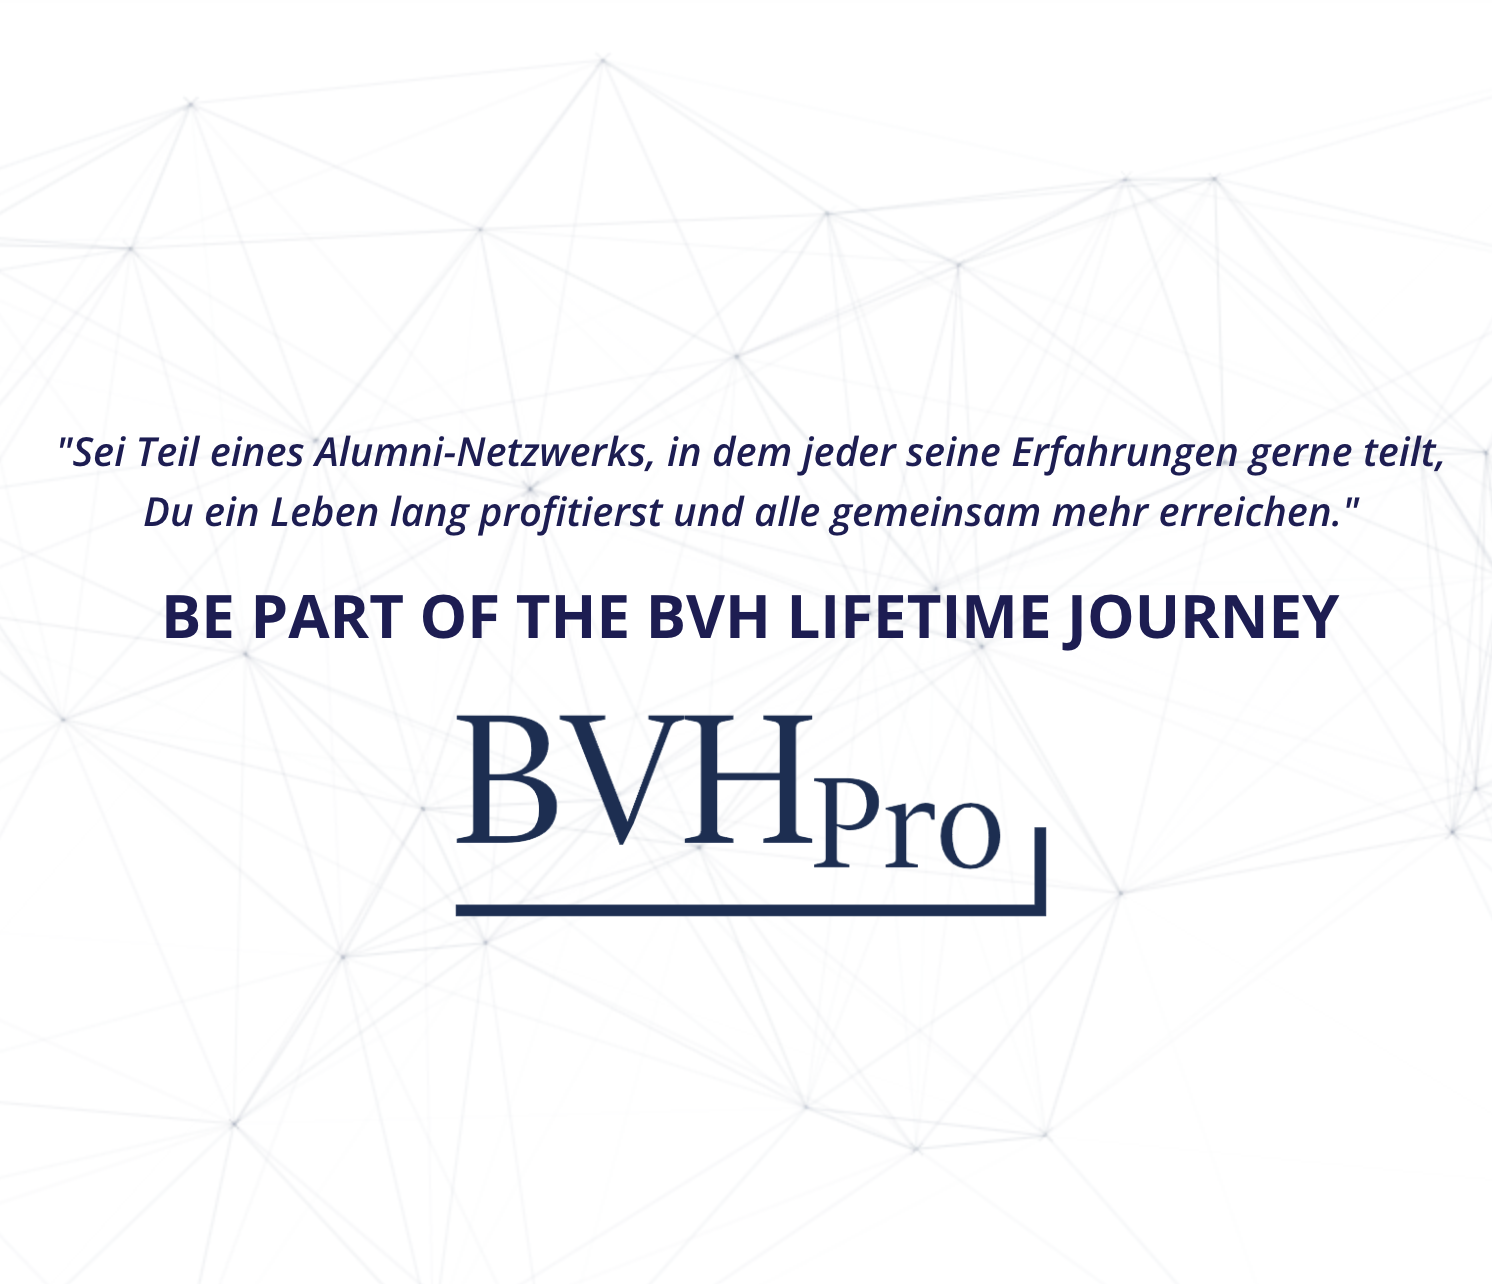 Co-CEO & Co-Founder, BVHPro, 2019 – 2022